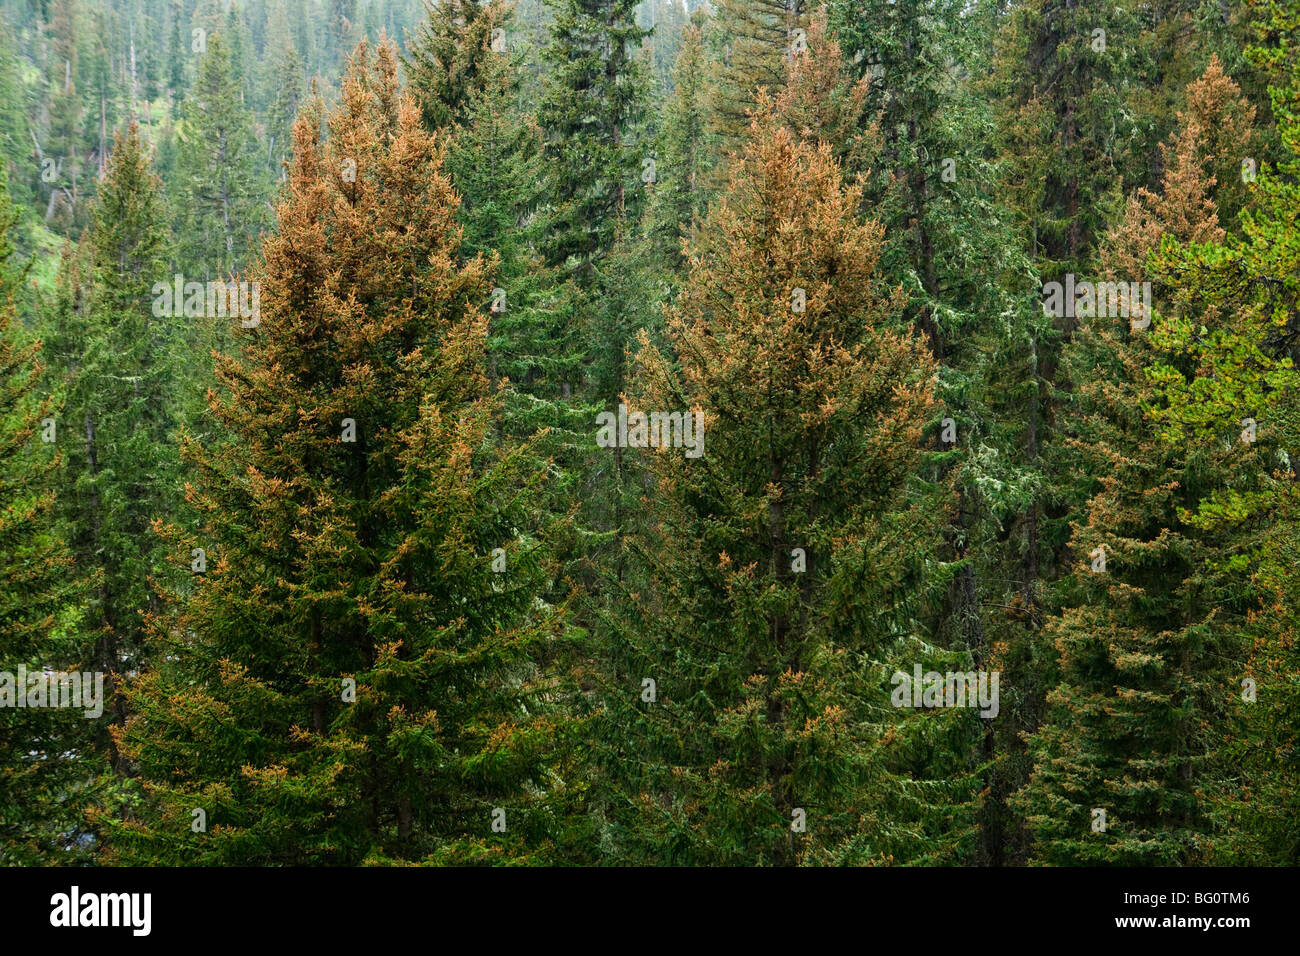 A conifer forest in Southwestern Montana showing the damage caused by Mountain Pine Beetles and climate change. Stock Photo